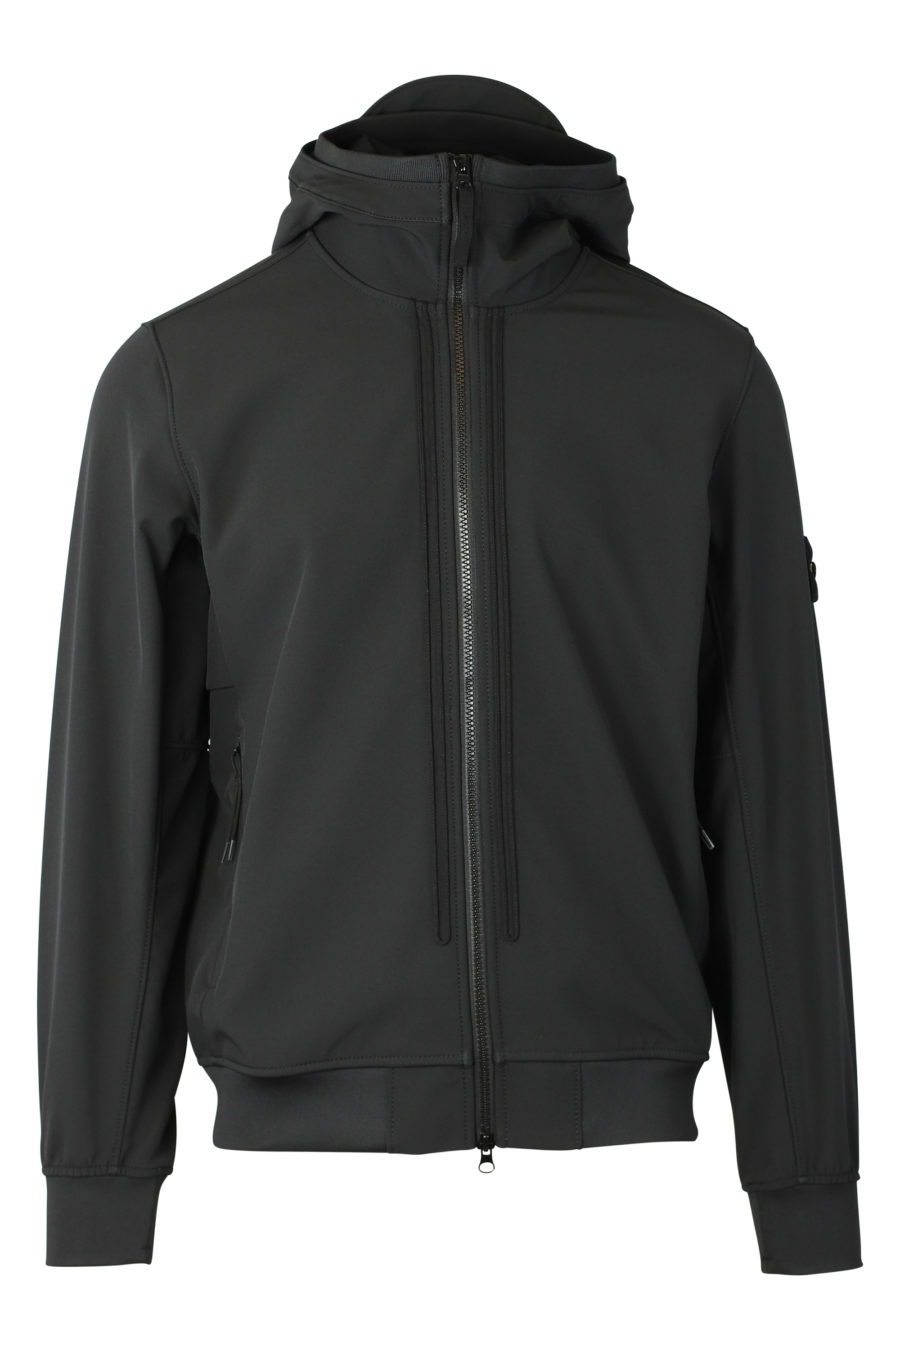 Black jacket with hood and logo patch - IMG 9305